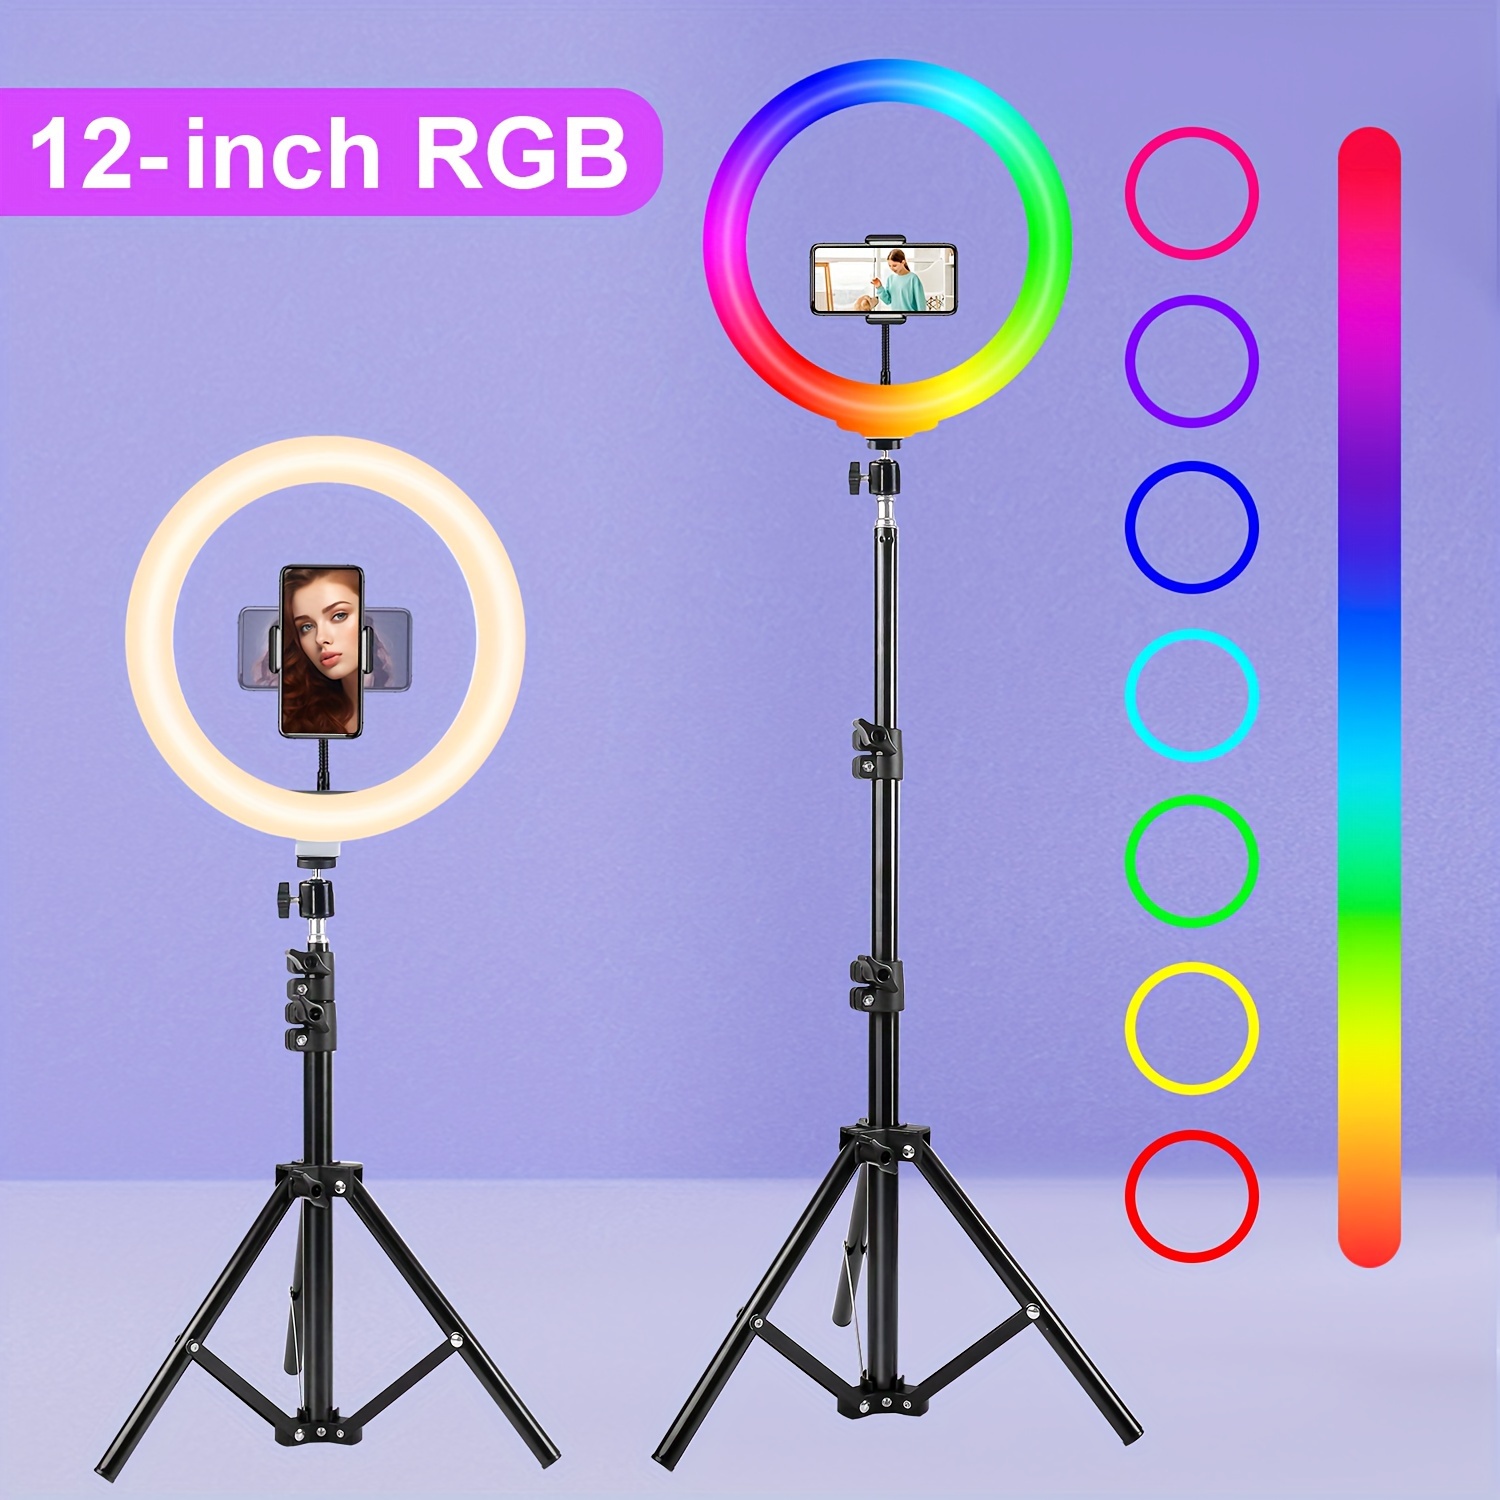 

12 Inch Rgb Circular Light, Bright And Adjustable, Equipped With A Flexible Tripod, Perfect For Selfies, Video Recording, Content Creators, And A Stand For